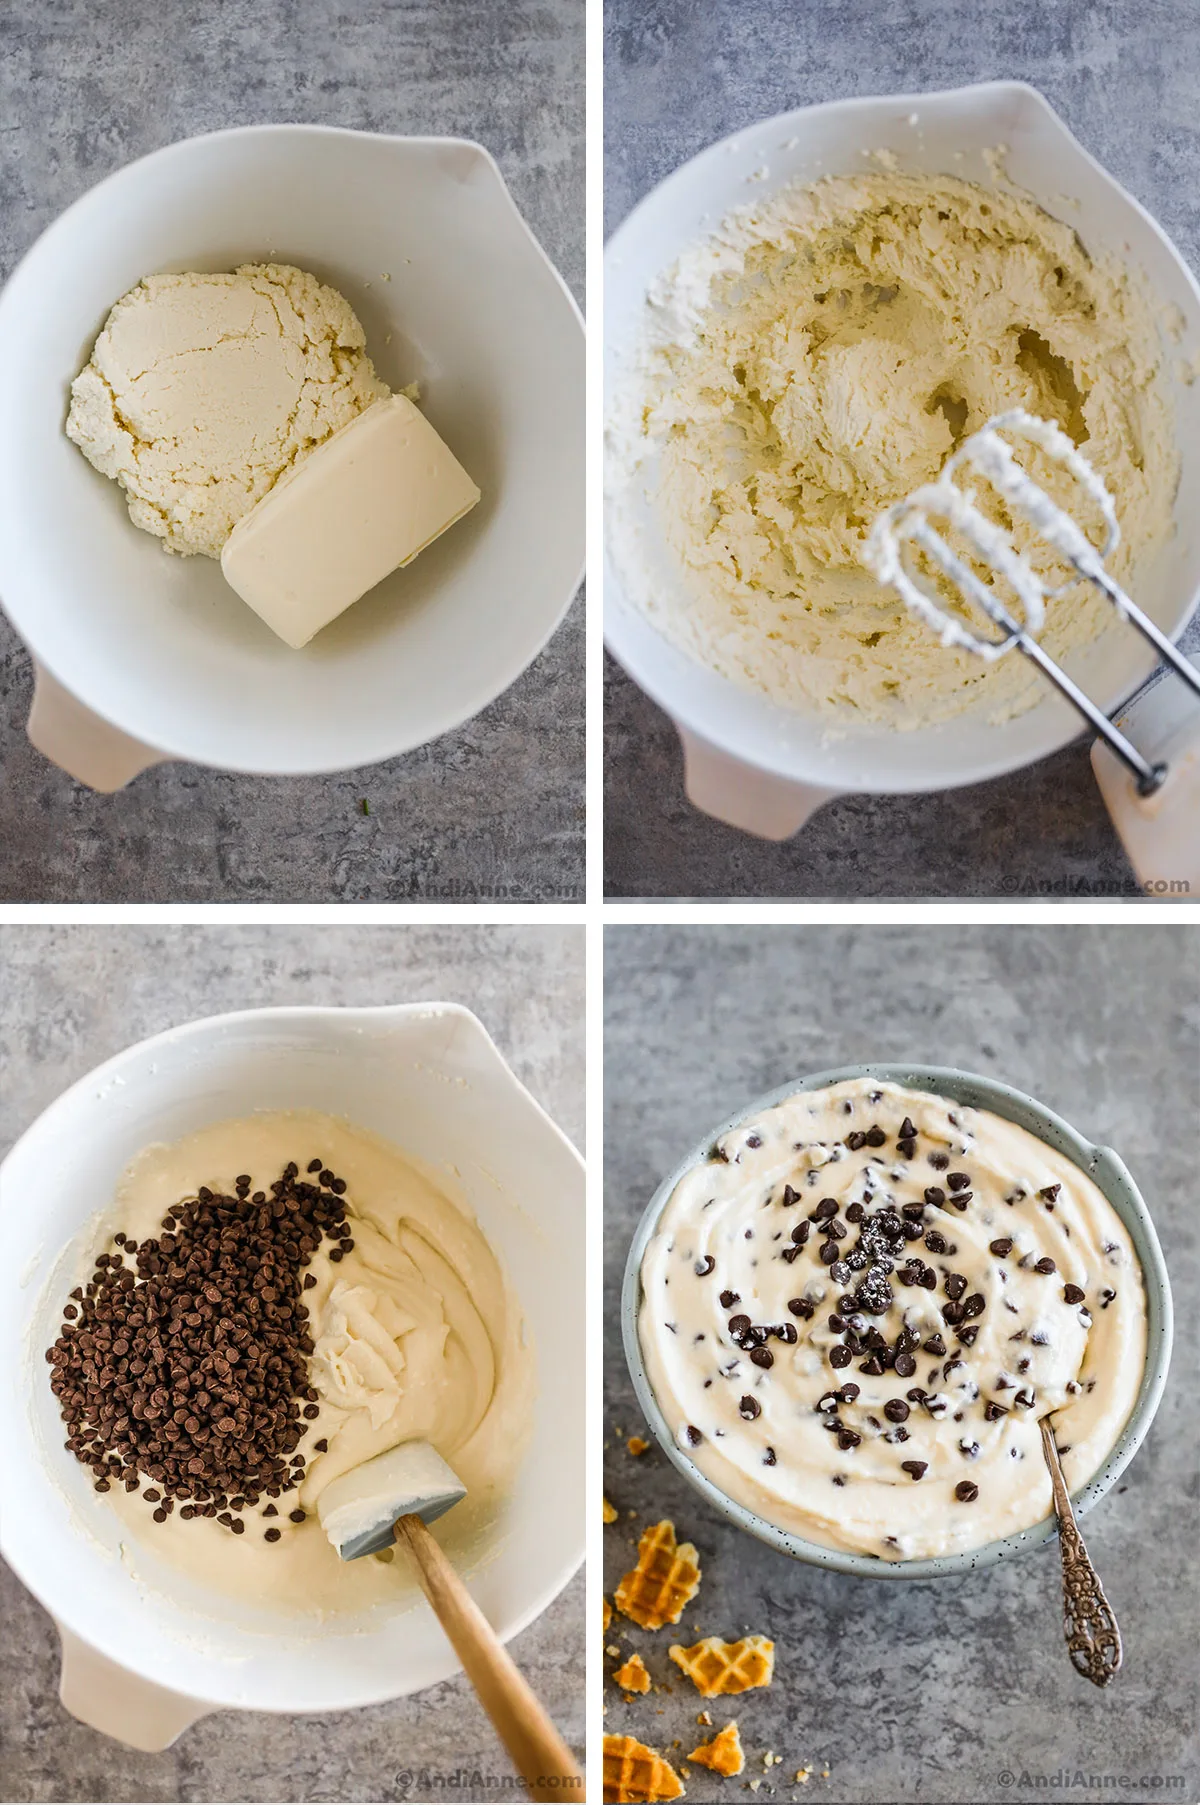 Four images showing steps to make recipe. First is ricotta cheese and cream cheese. Second is creamed cheeses in a bowl with electric mixer. Third is creamy white mixture topped with mini chocolate chips. Fourth is cannoli dip recipe in a bowl with chocolate chips and a spoon. 